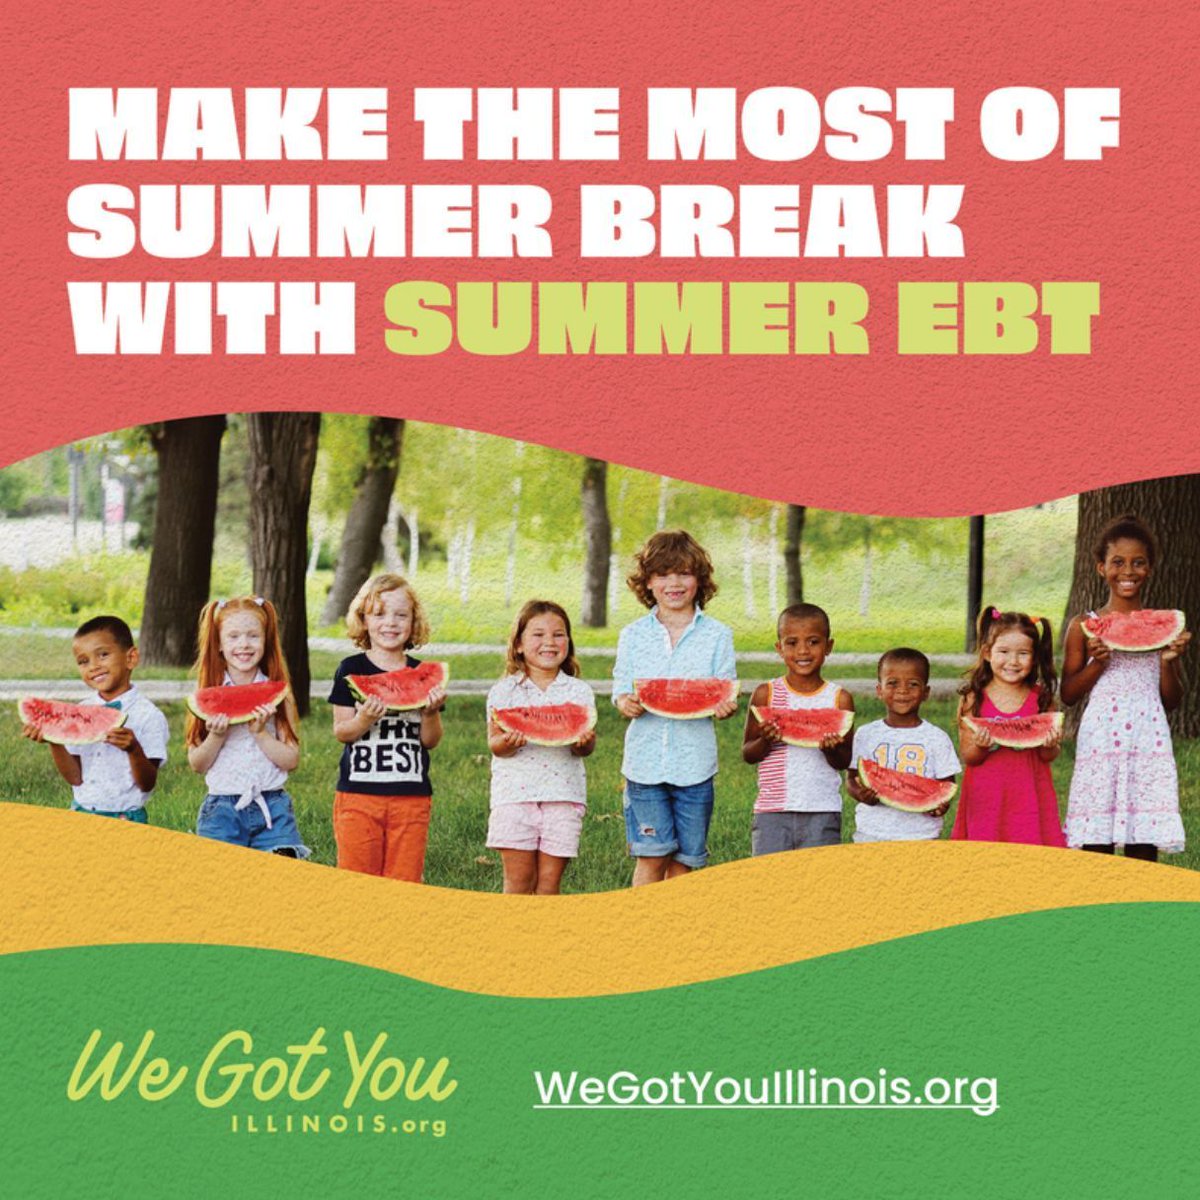 When school is out for the summer and budgets are tight, you can get help to feed your kids with Summer EBT! Eligible families, regardless of immigration status, can receive $120 one-time per child to help with groceries during the summer. Learn more at buff.ly/3xHRSxF